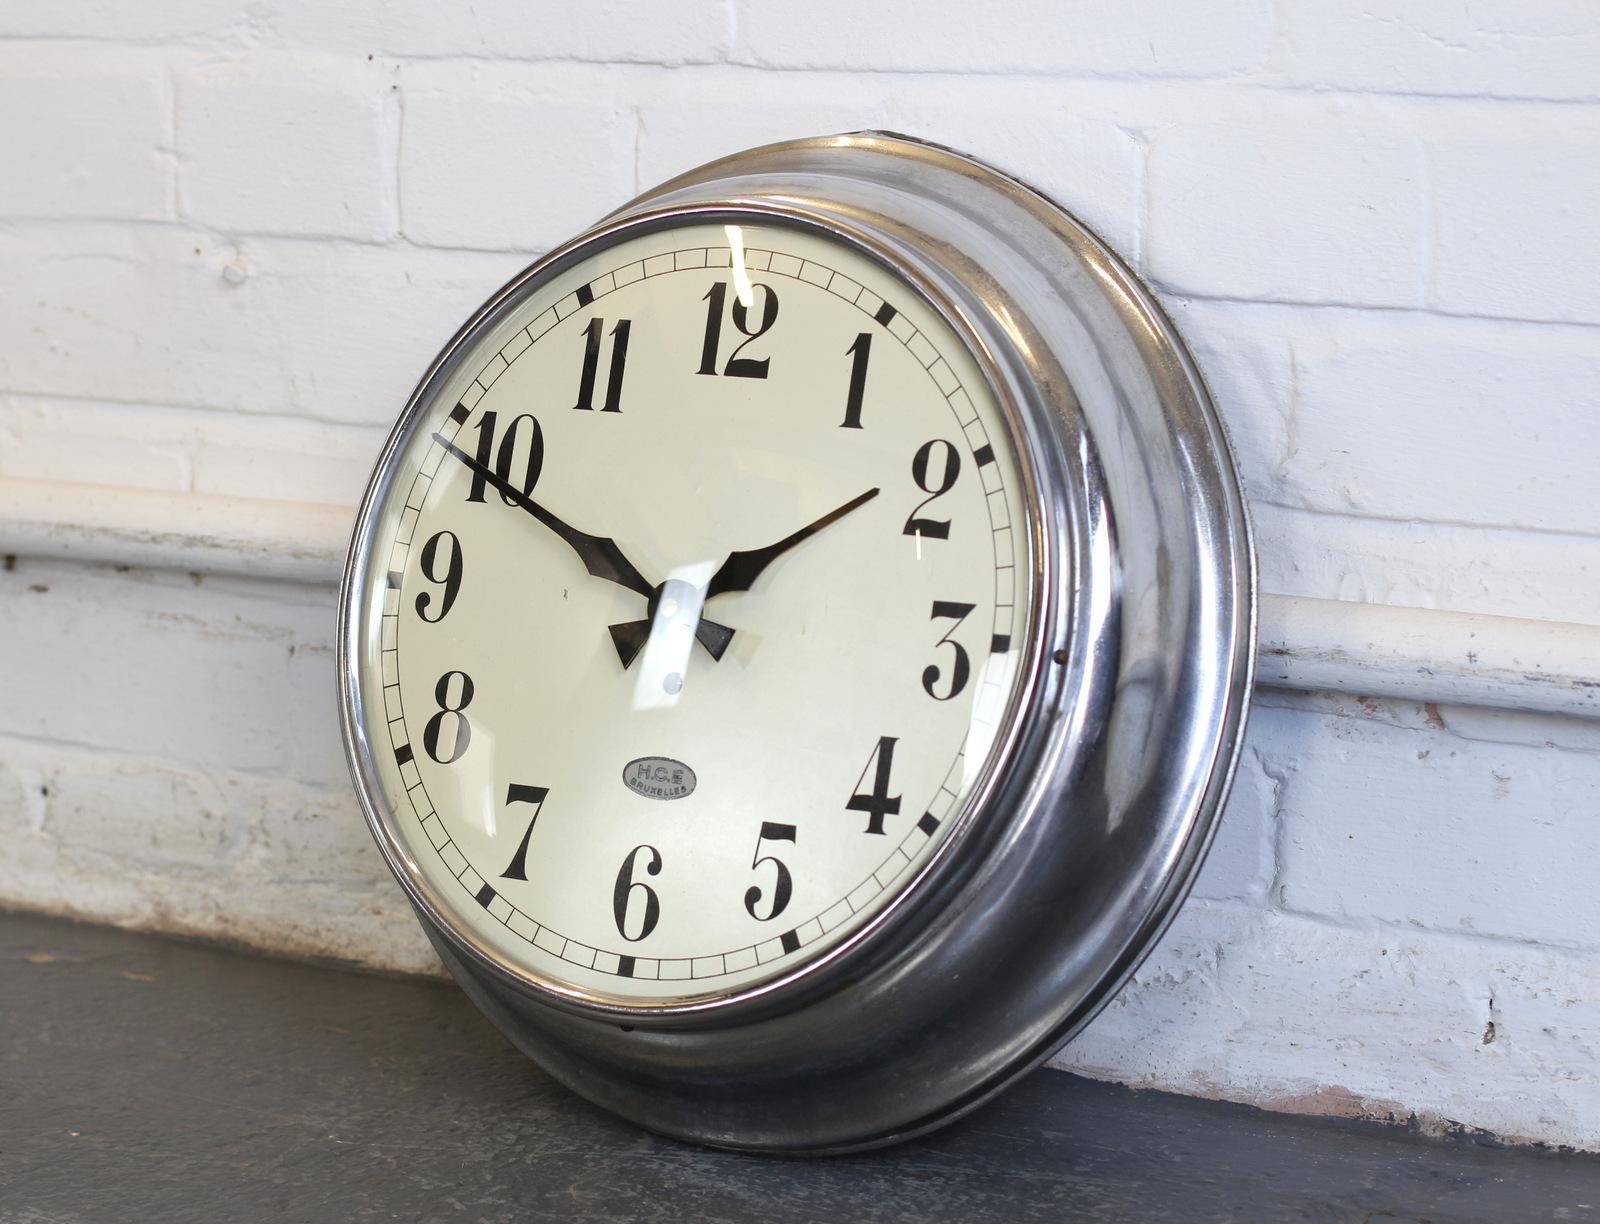 Office clock by HCE, Brussels, circa 1930s.

- Domed glass face
- Tin dial with makers badge
- Chrome casing
- New AA battery powered motor
- Belgian, circa 1930s
- Measures: 39cm wide x 39cm tall x 9cm deep.

Condition report:

Fully